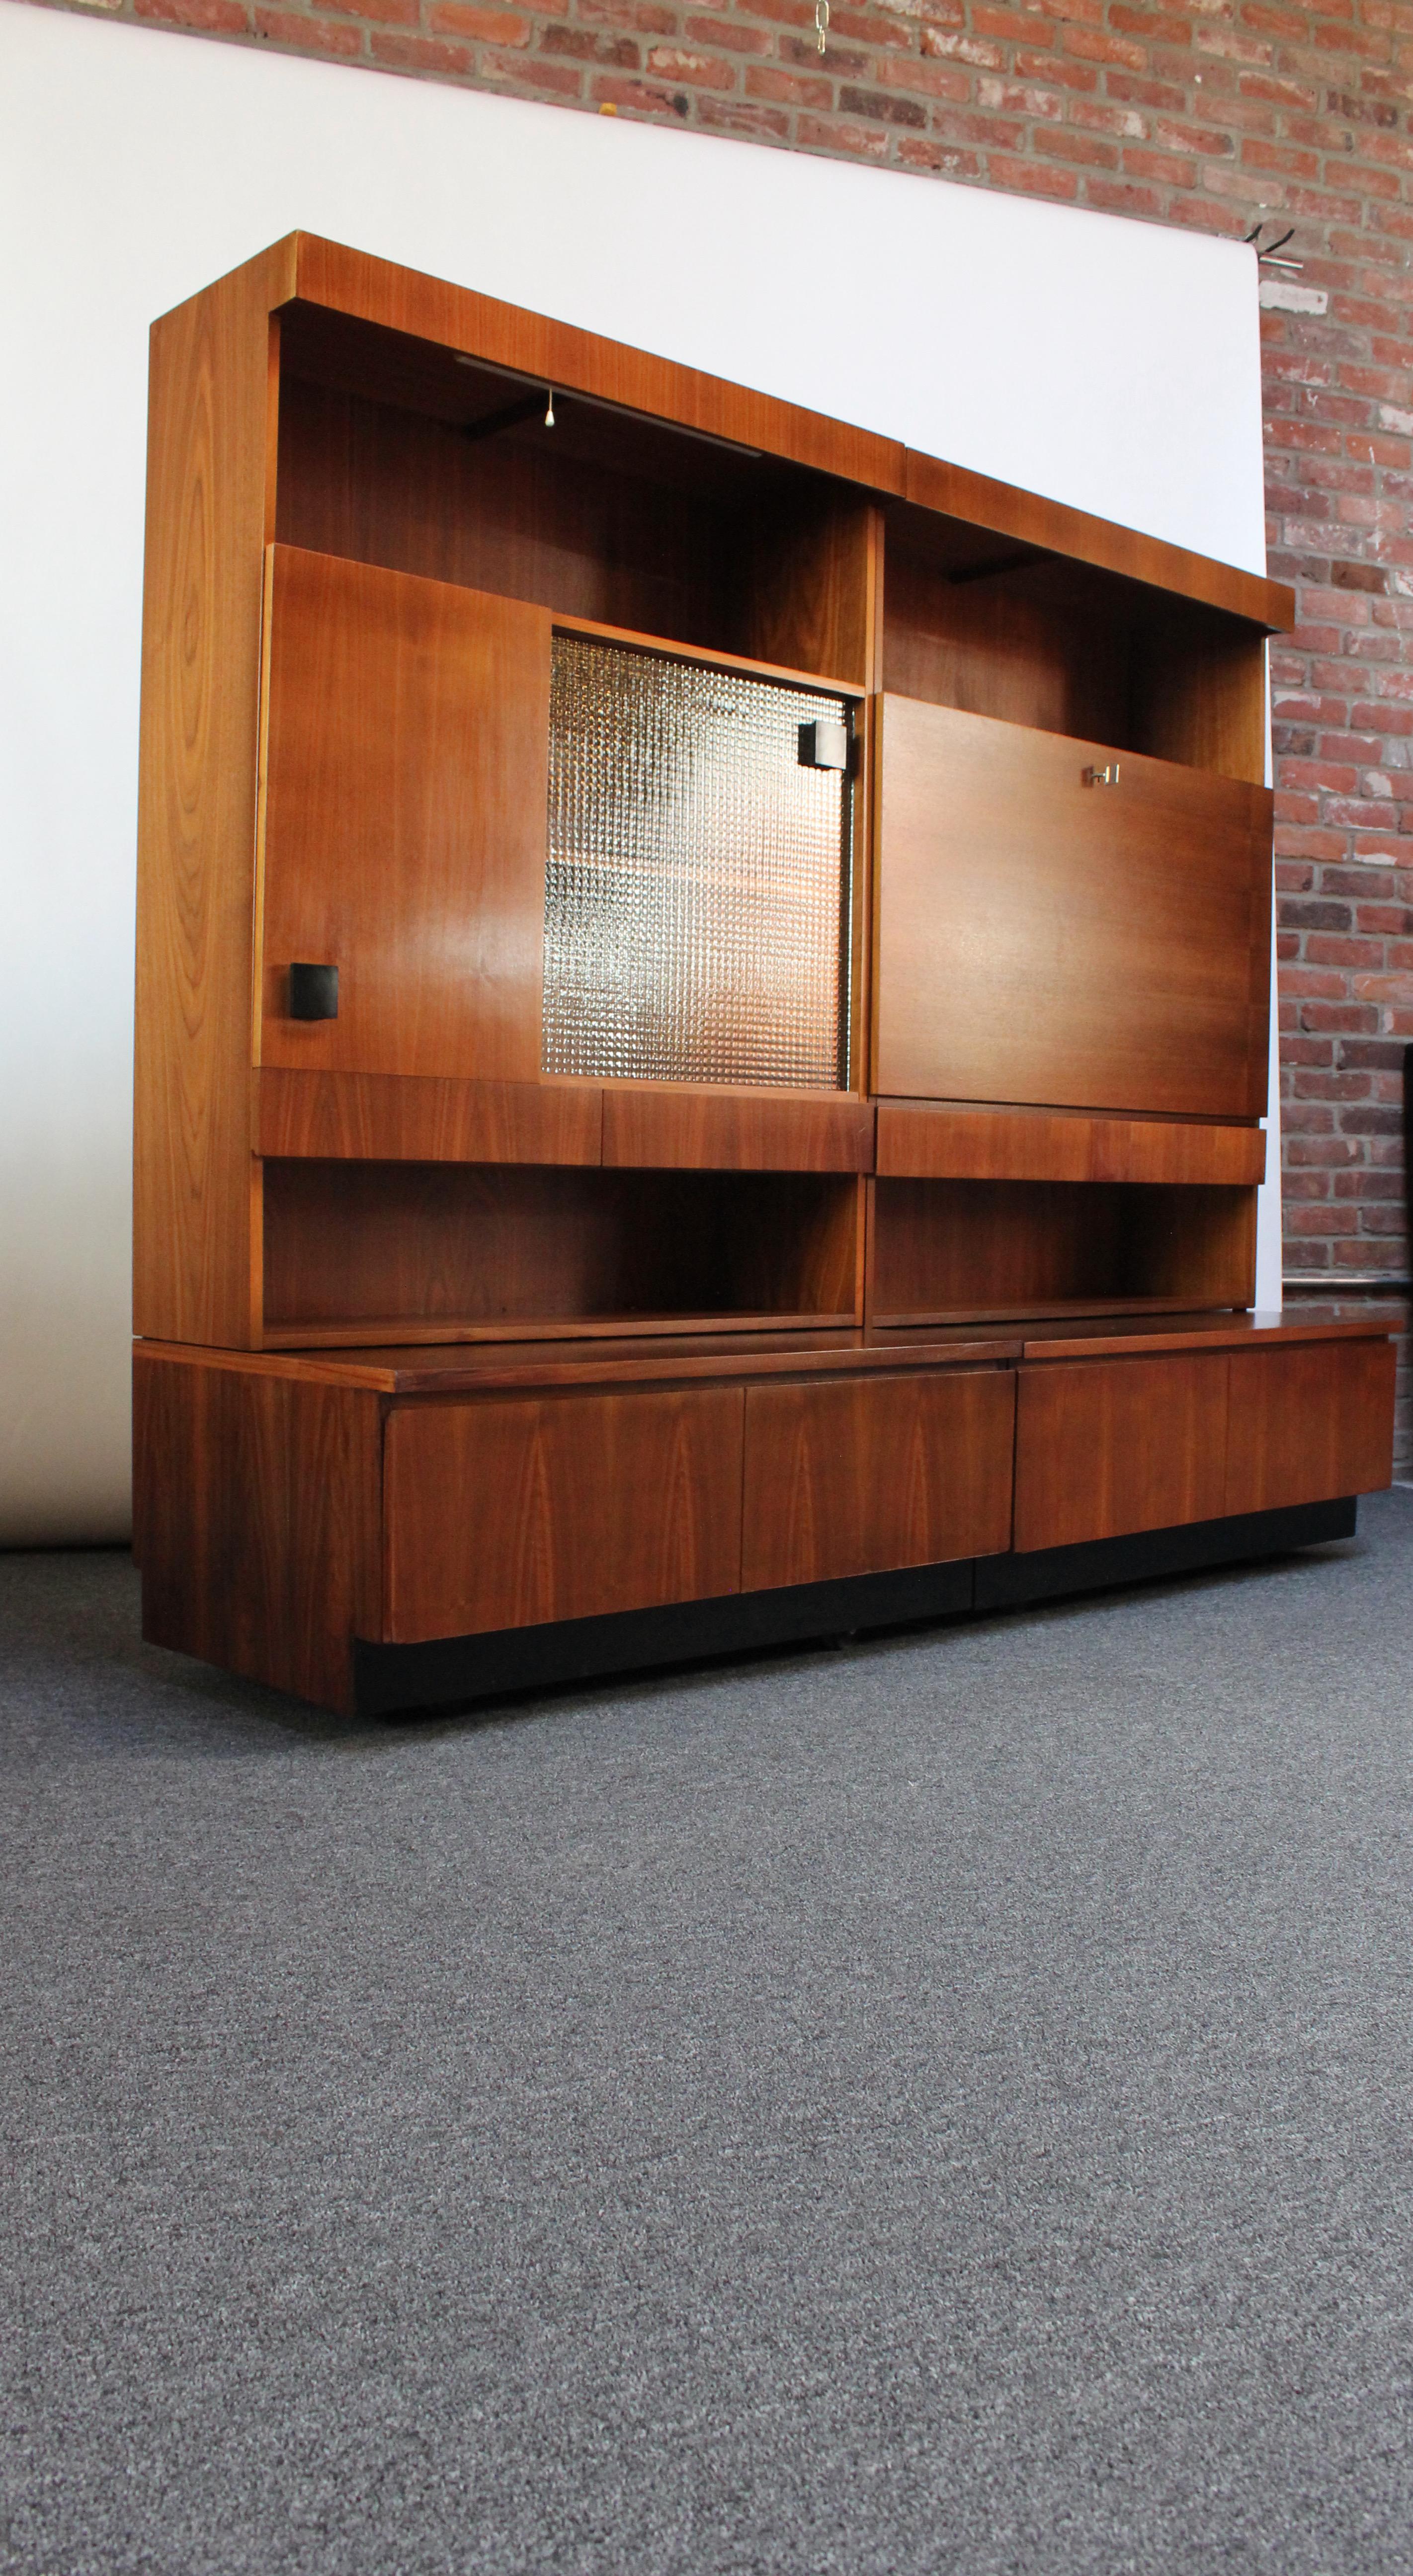 Stylish freestanding wall units boasting bookmatched walnut veneer (ca. early 1970s, Italy). Each comes with a black vinyl seat (more for decoration than practical use).
The first unit features a functional light with elegant pull on / off string